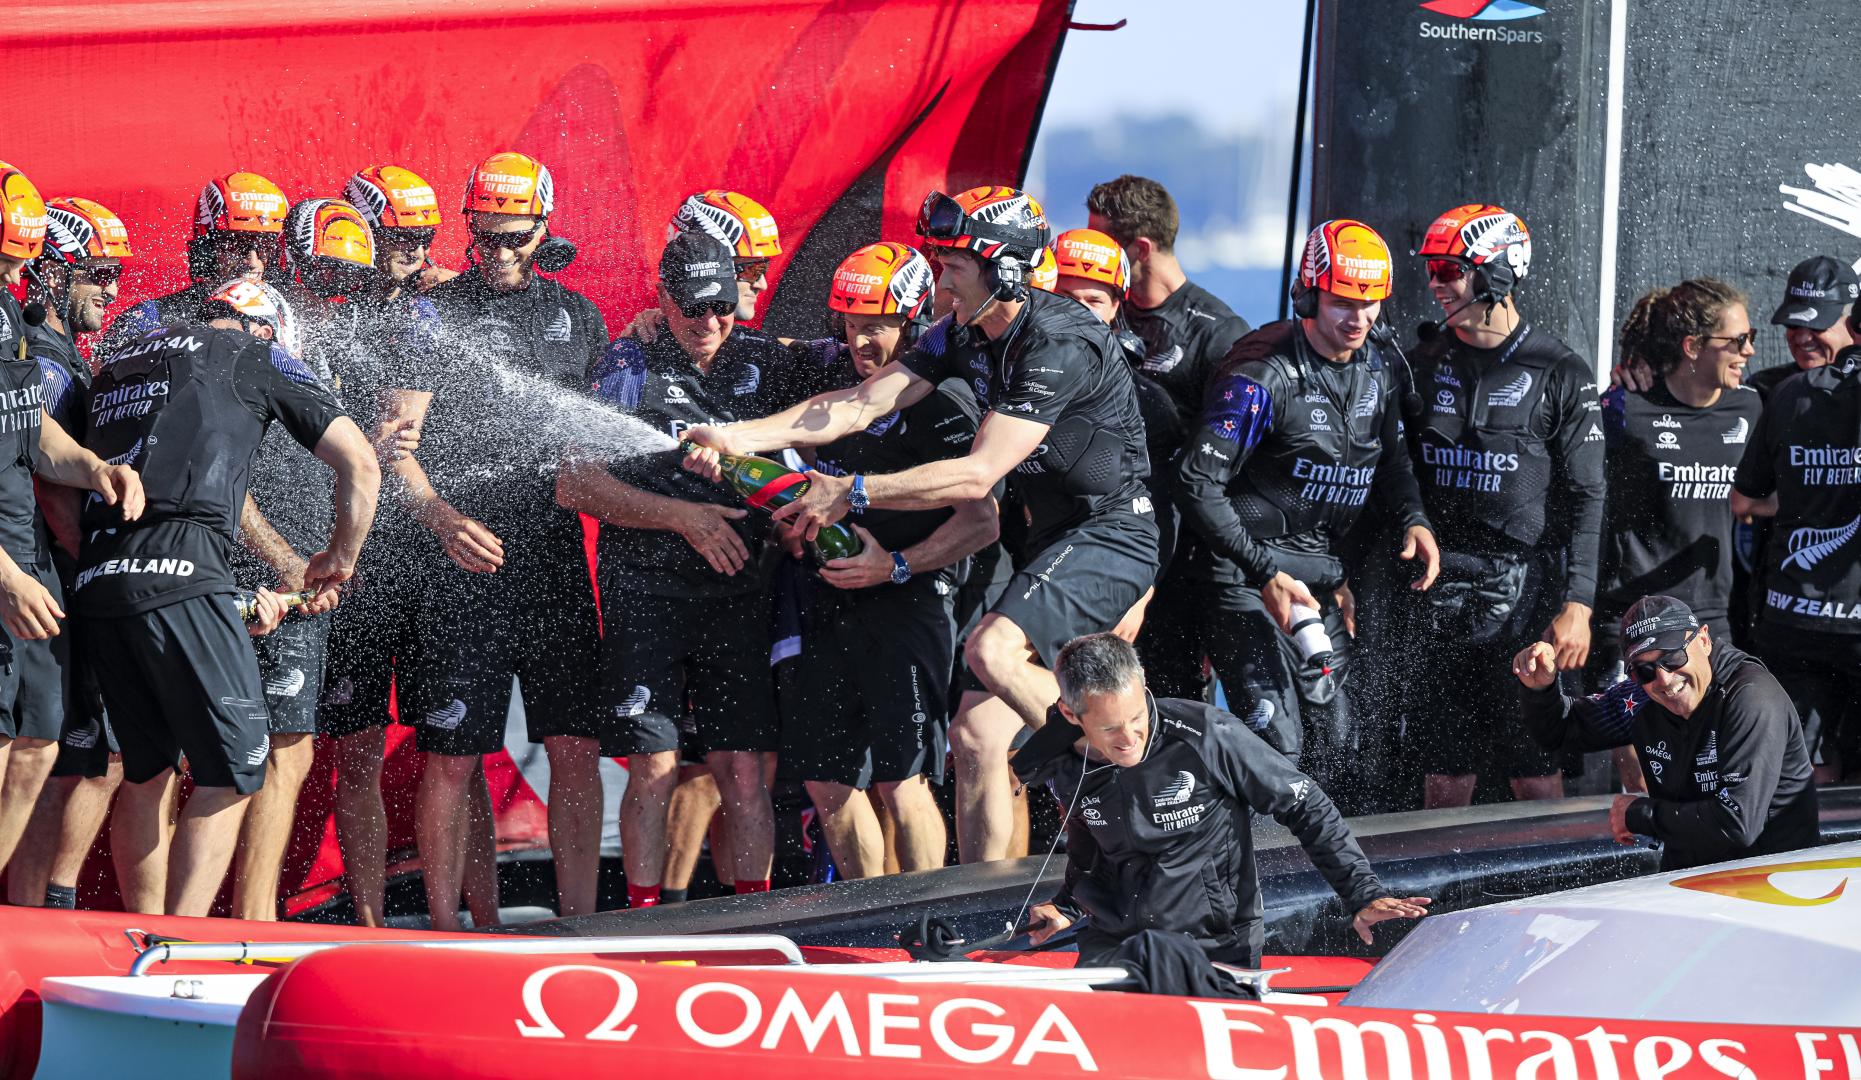 Emirates Team New Zealand win the 36th America’s Cup